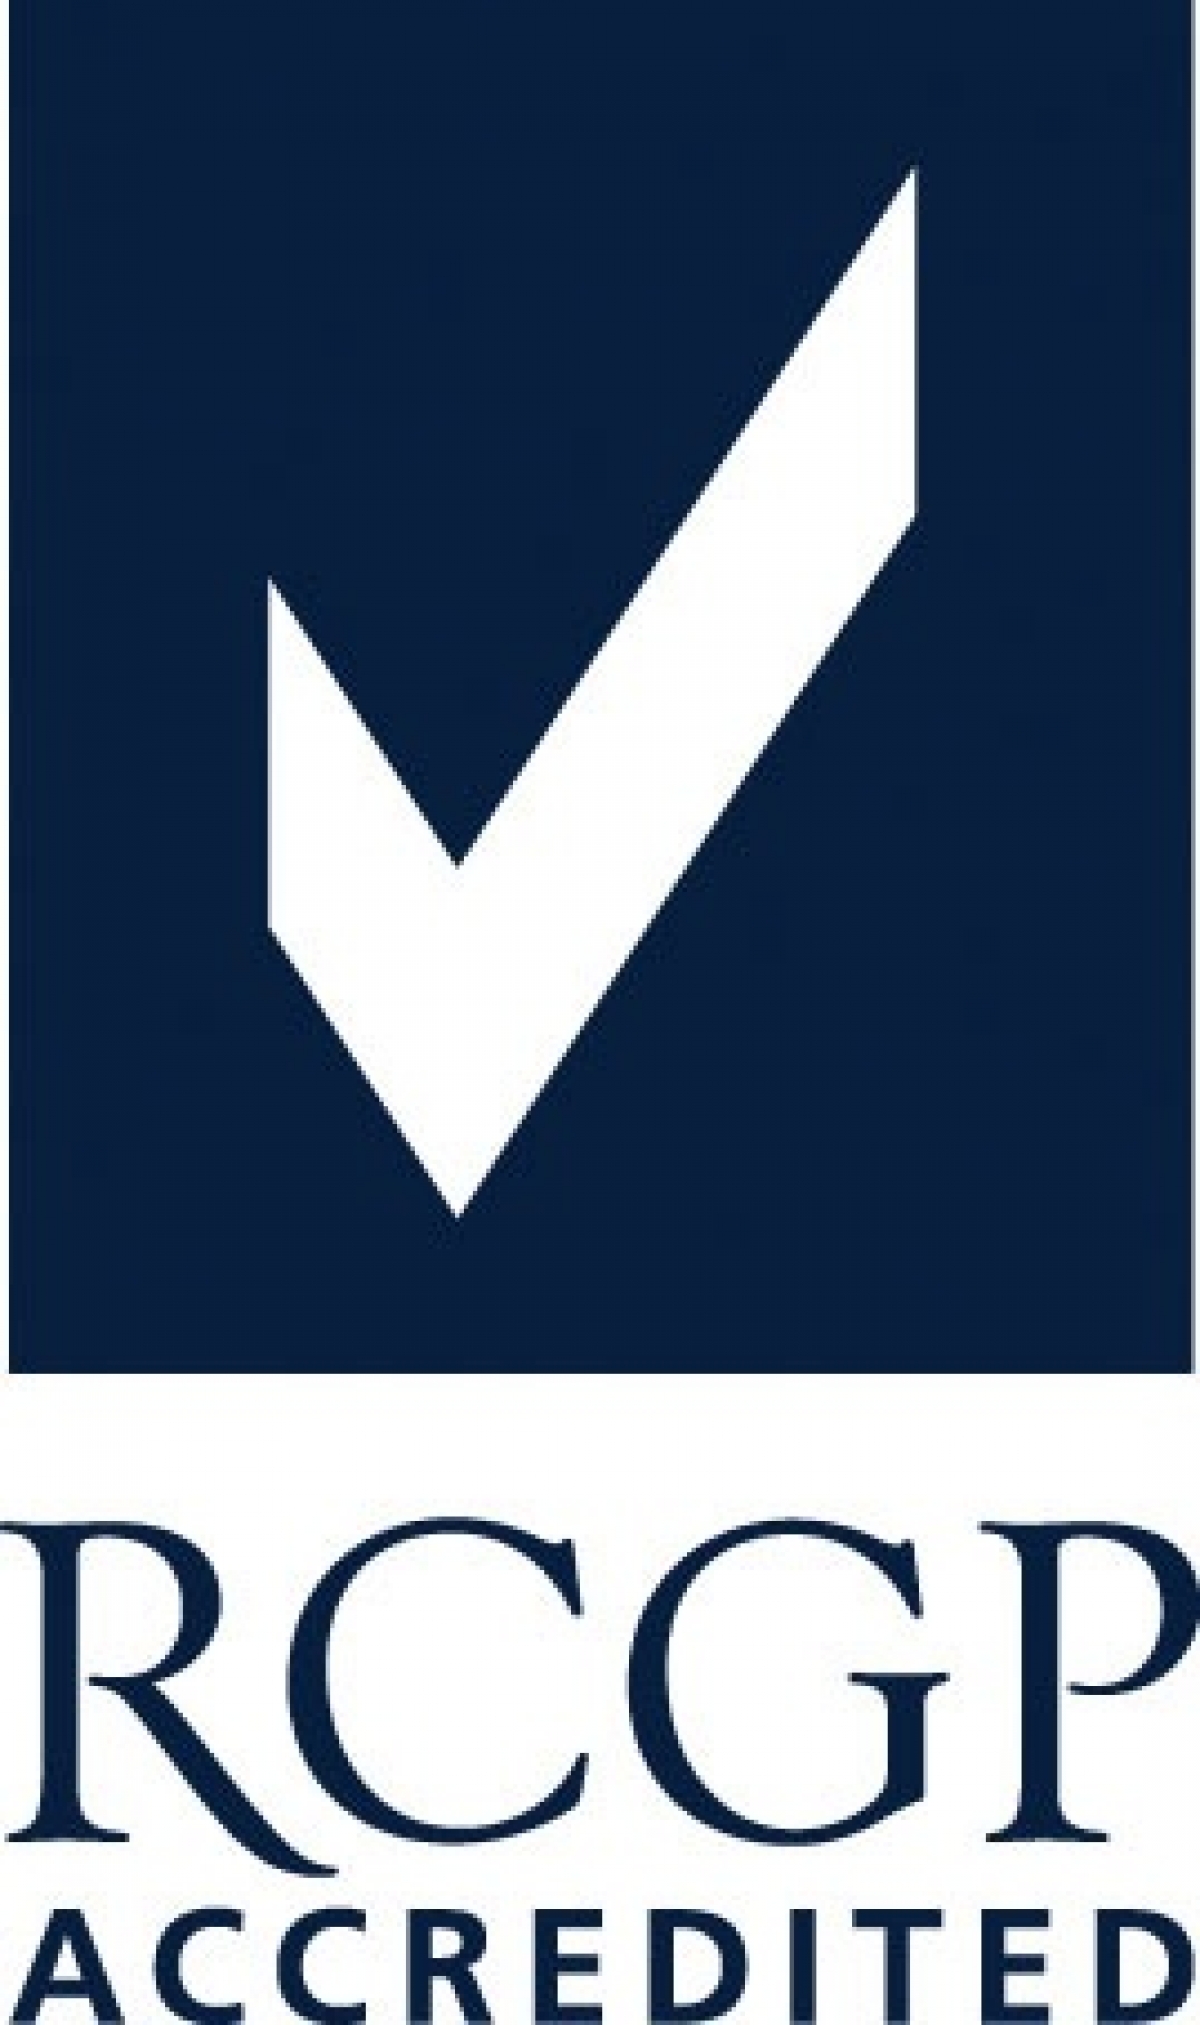 CDEP Is Re Accredited By The RCN And The RCGP For Another 12 Months